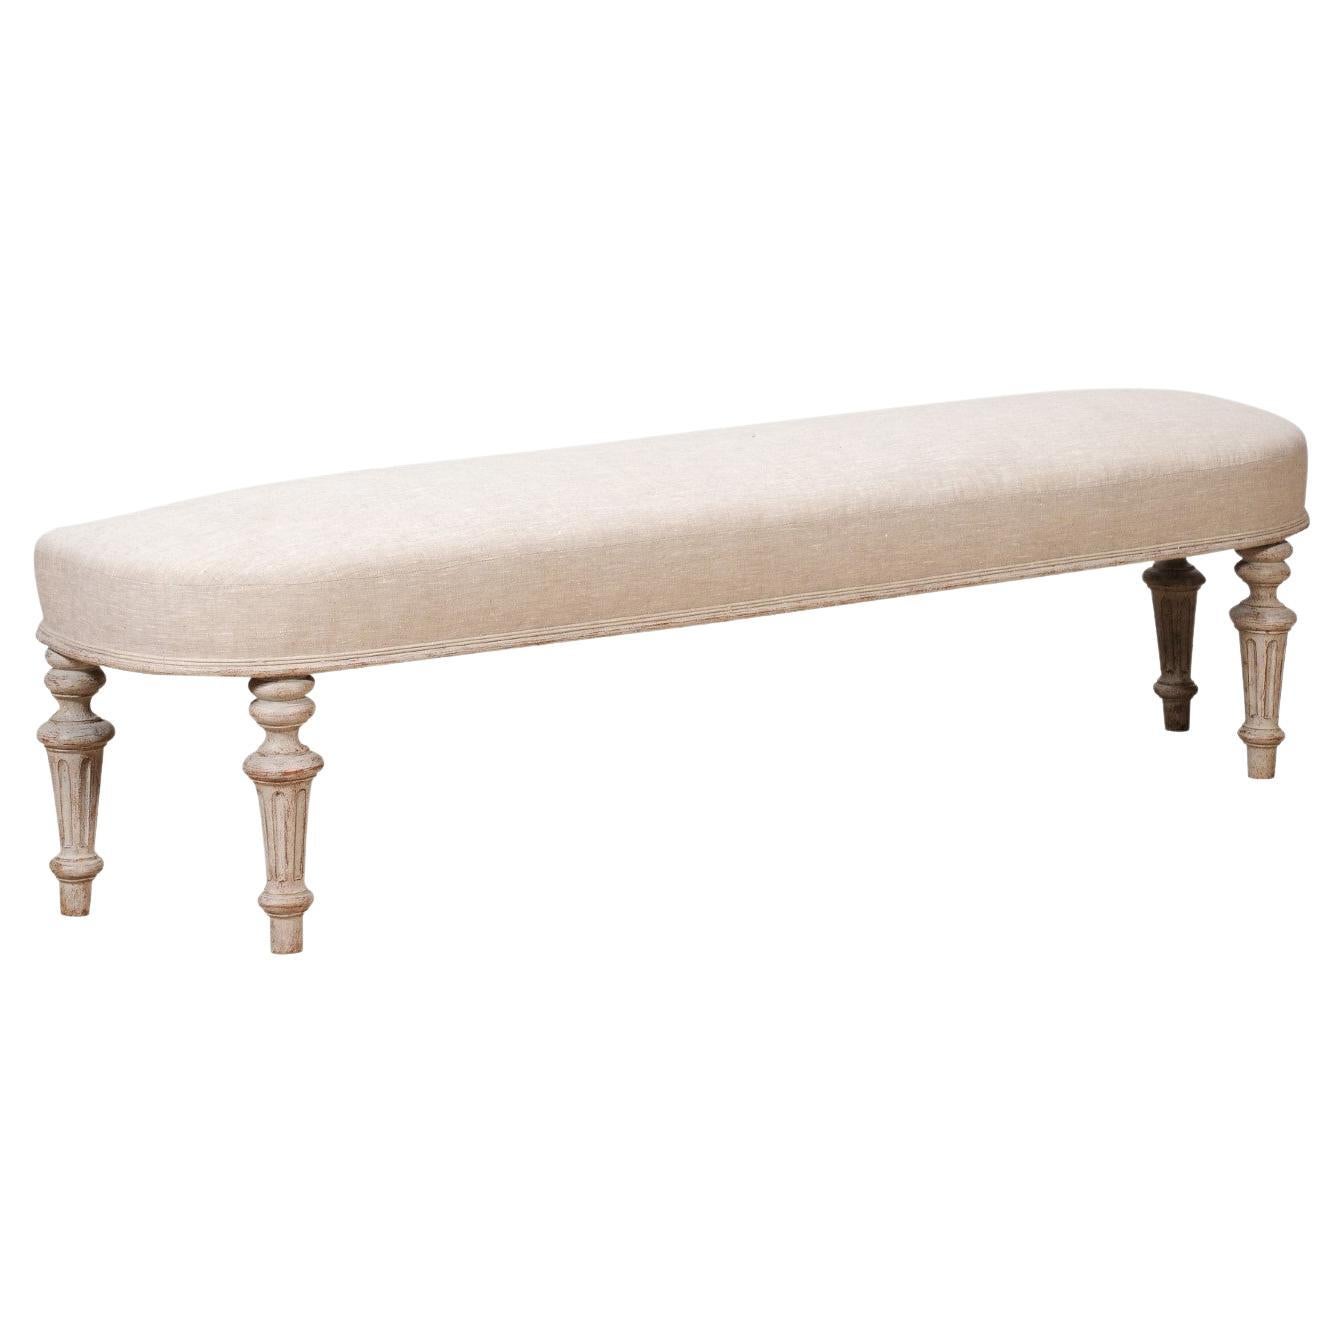 Swedish Neoclassical Style 1860s Painted Bench with Carved Fluted Legs For Sale